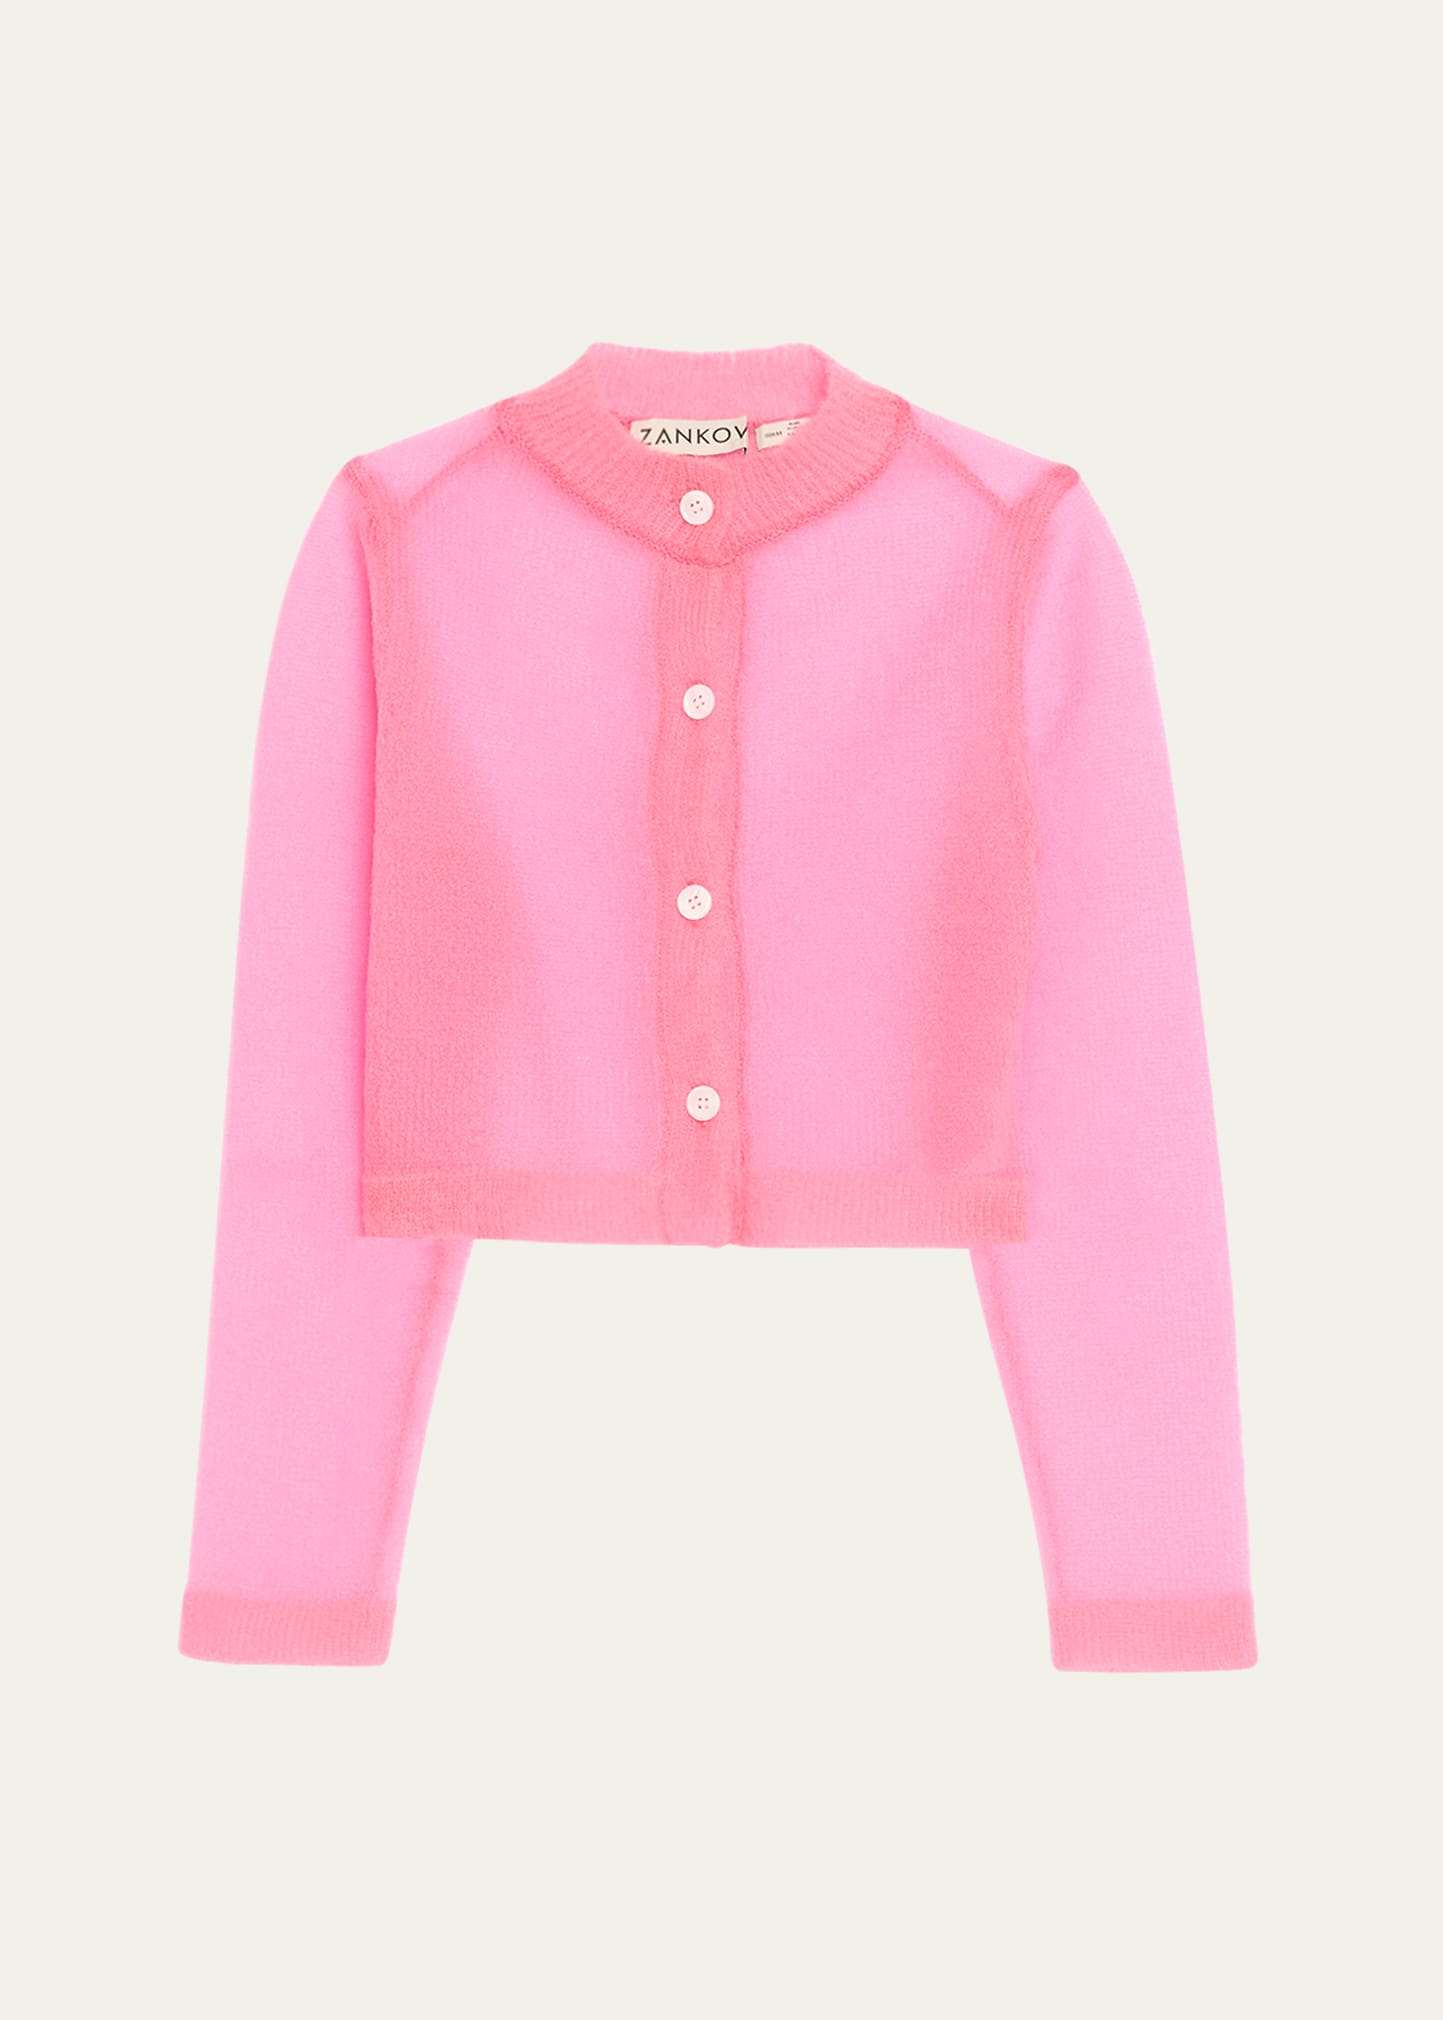 Shop Zankov Nelson Cropped Cardigan In Electric Pink